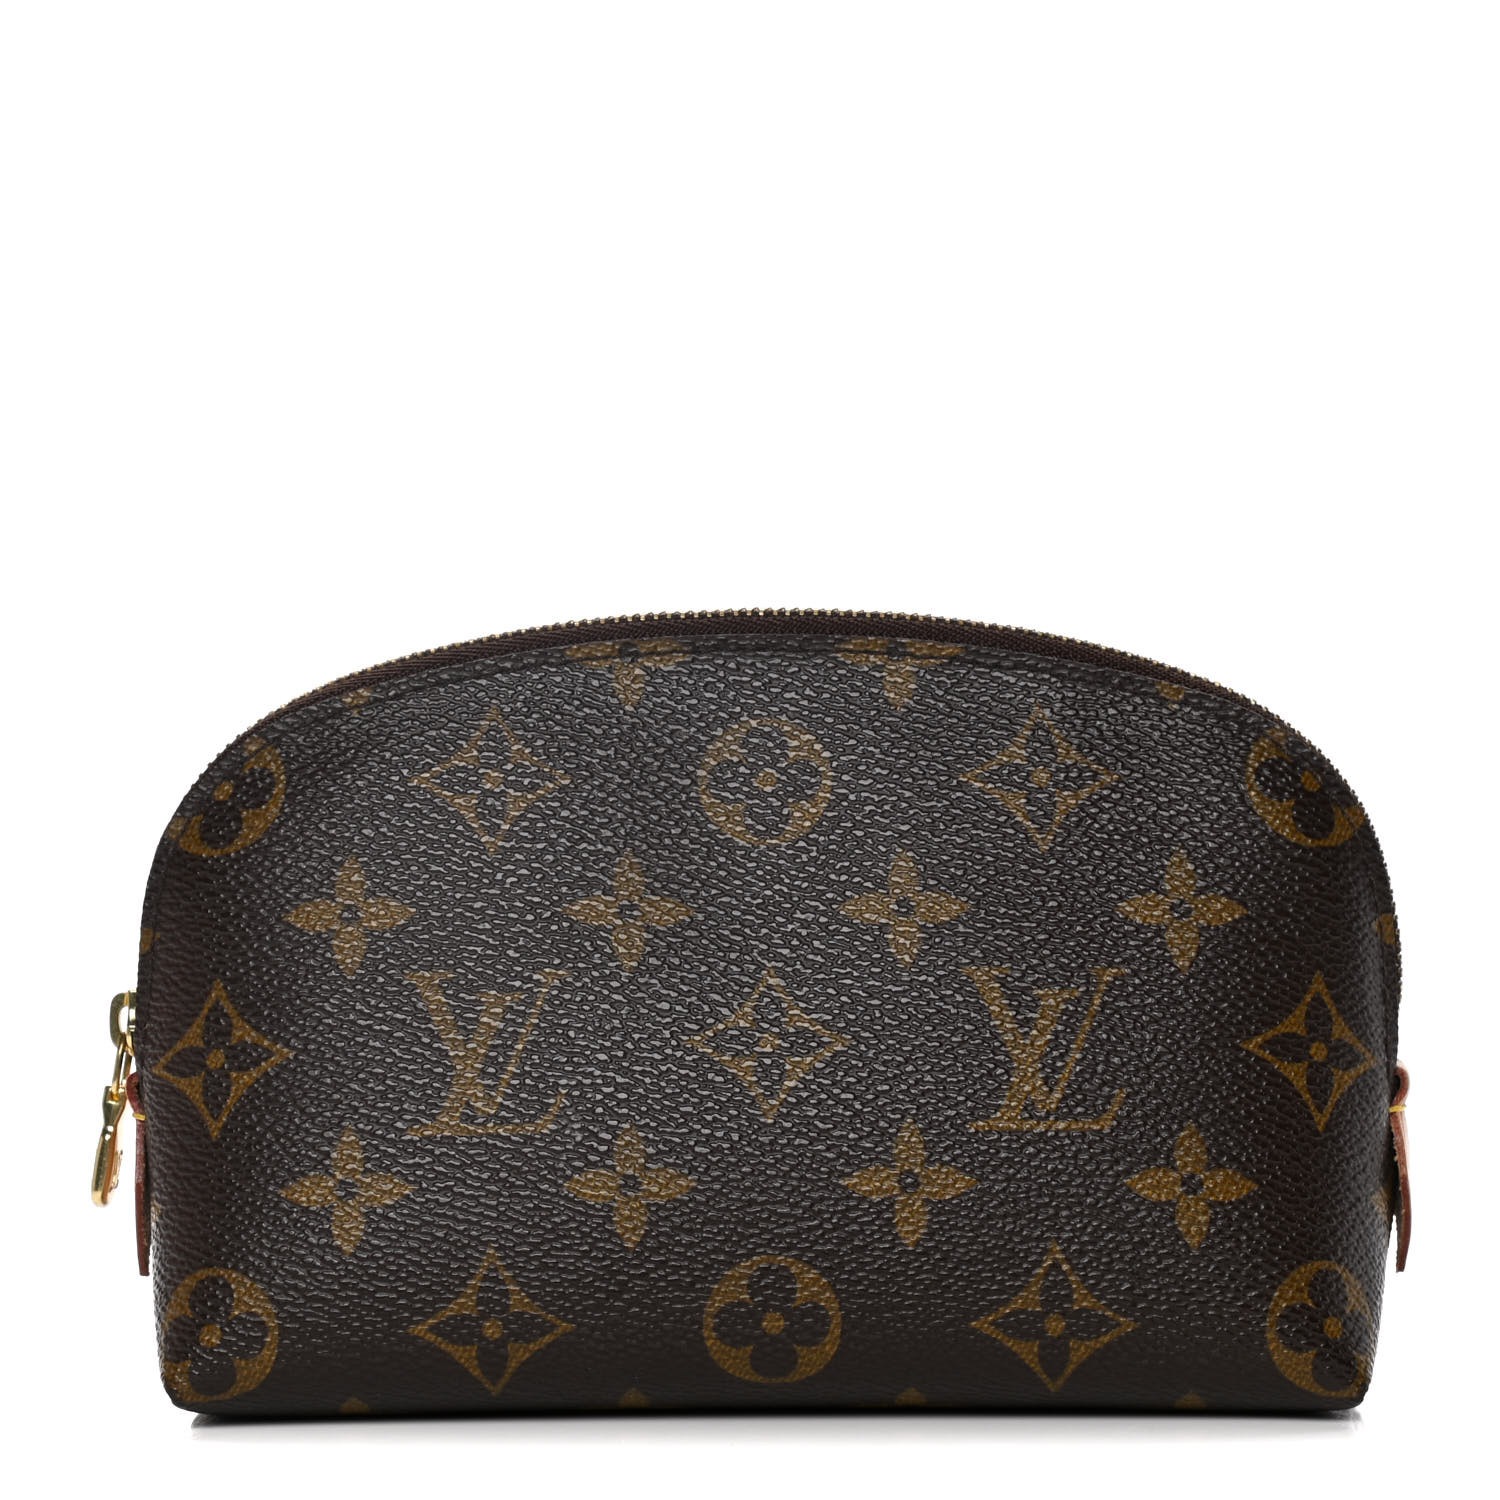 VUITTON Monogram Cosmetic Pouch 897638 |